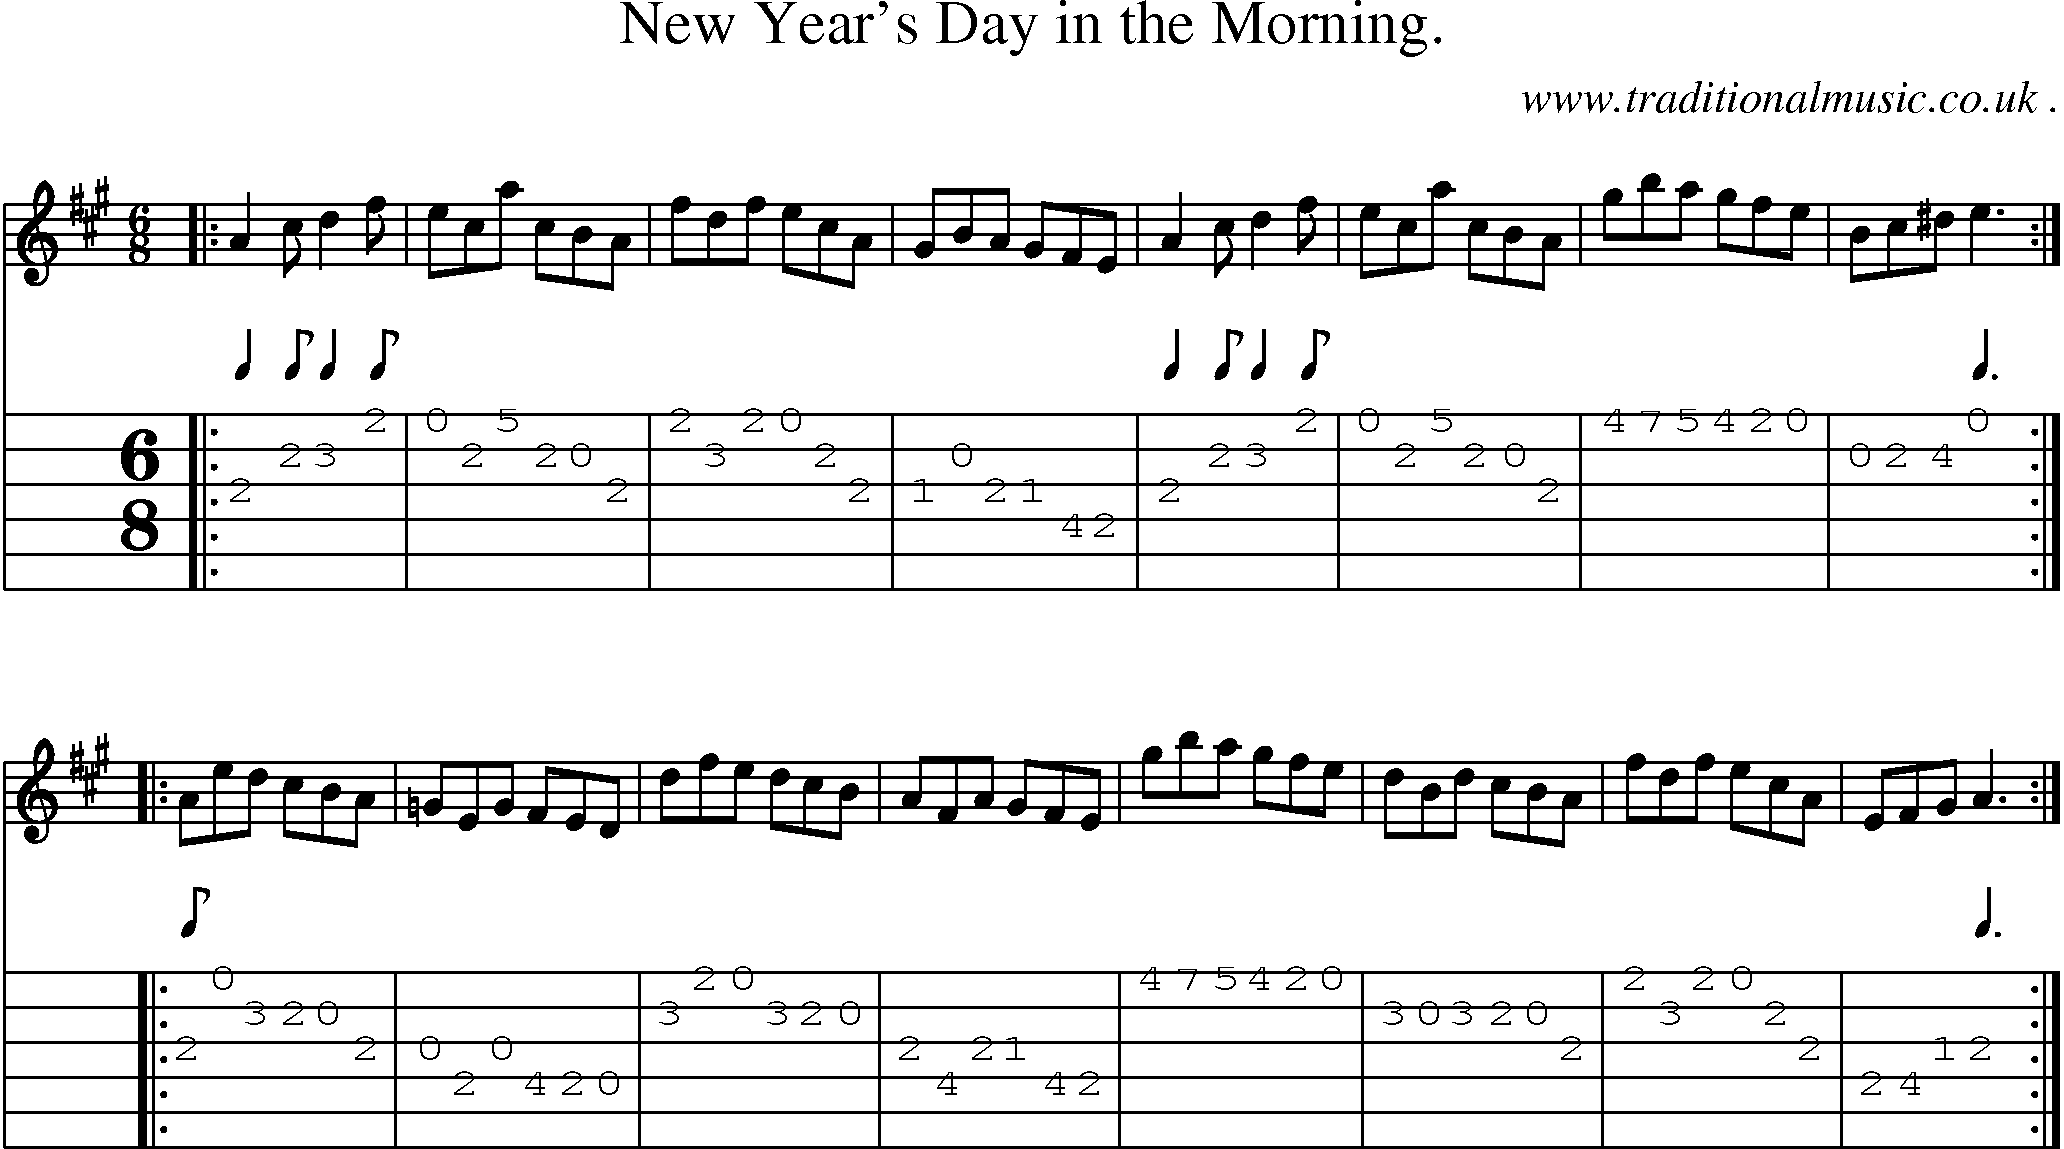 Sheet-music  score, Chords and Guitar Tabs for New Years Day In The Morning